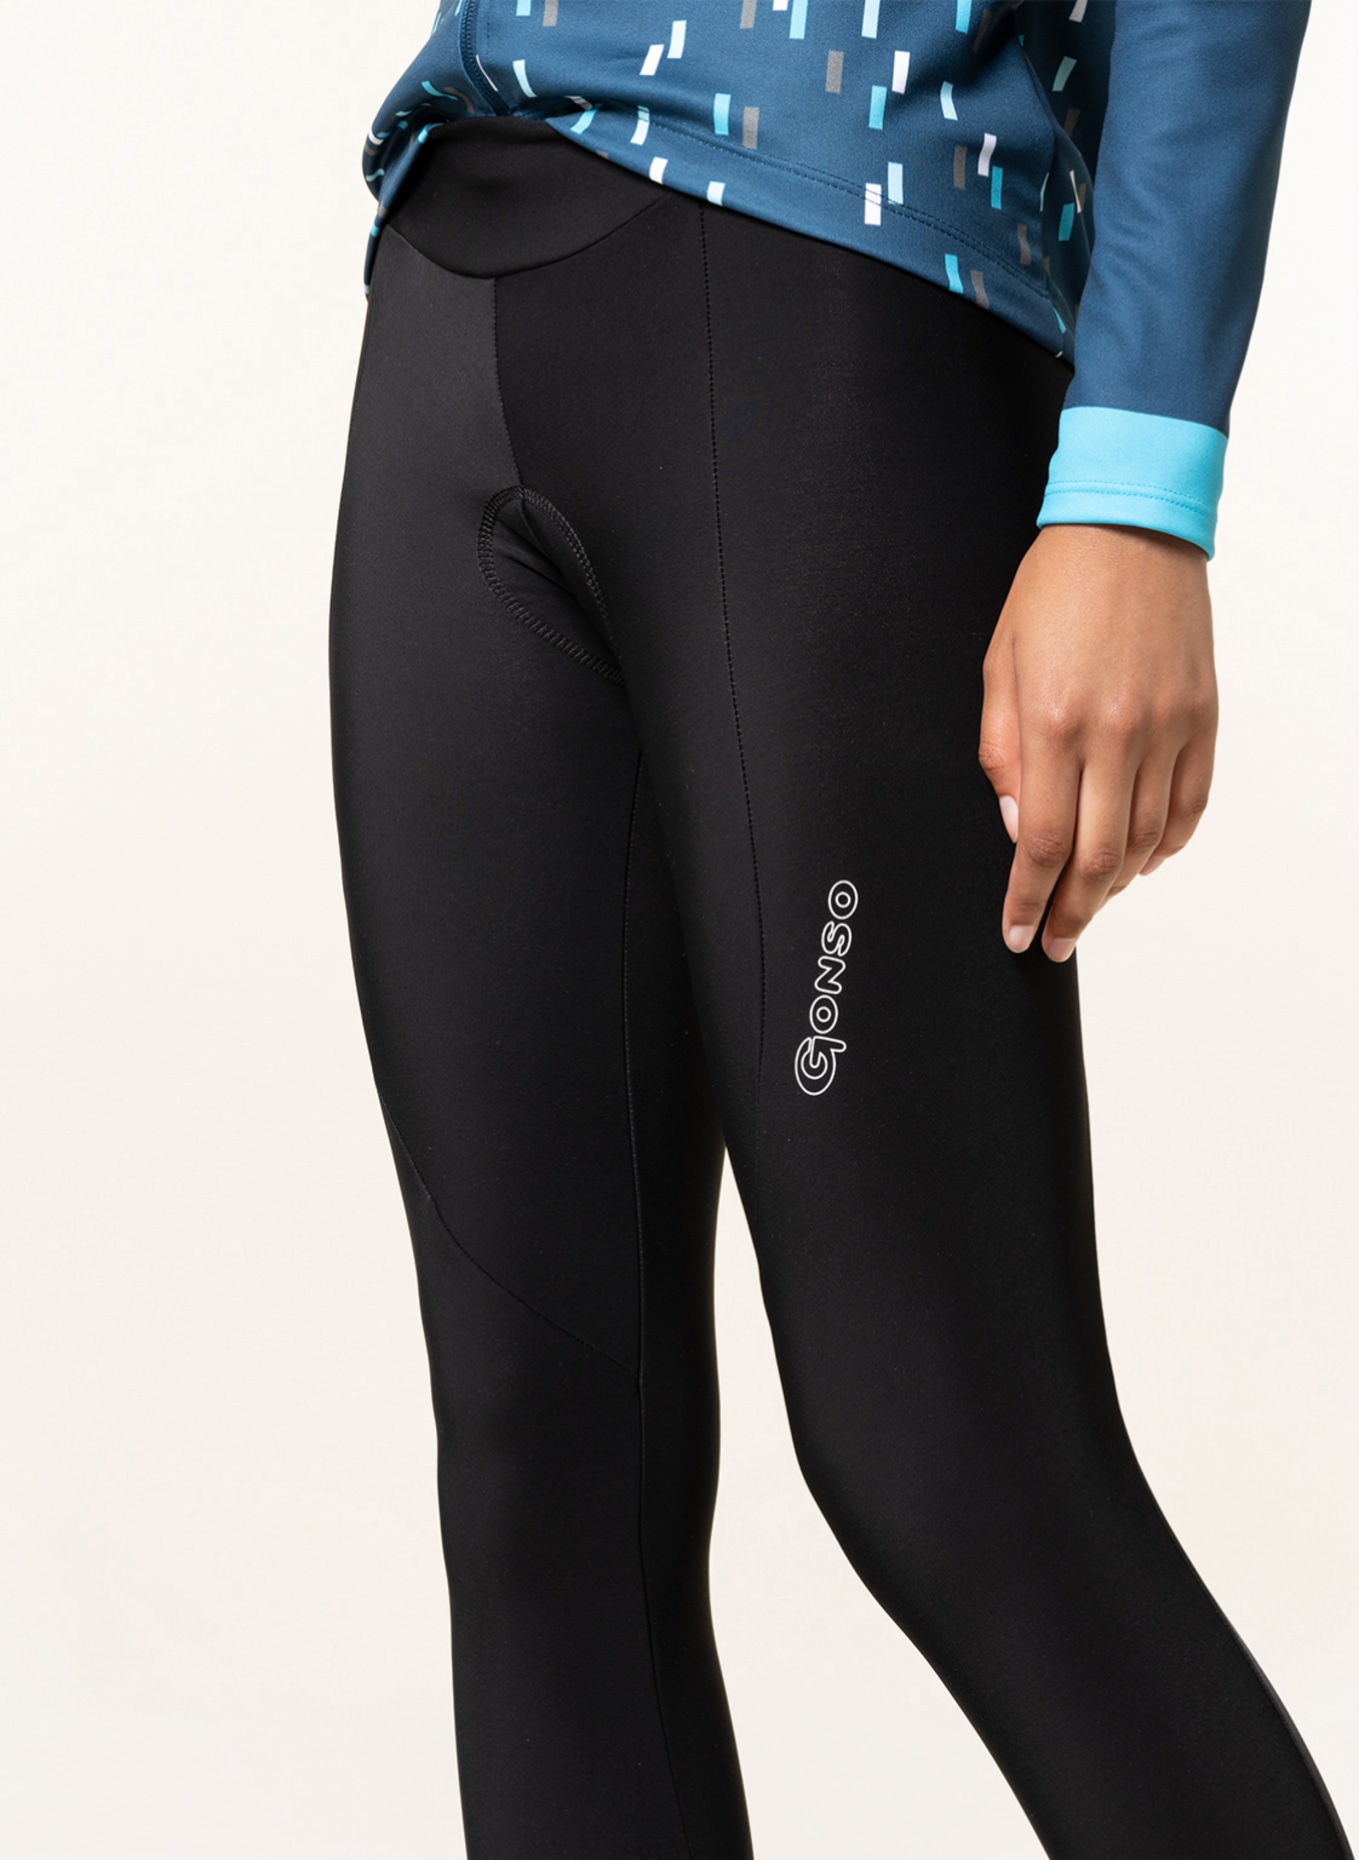 GONSO Cycling shorts in insert black with padded THER